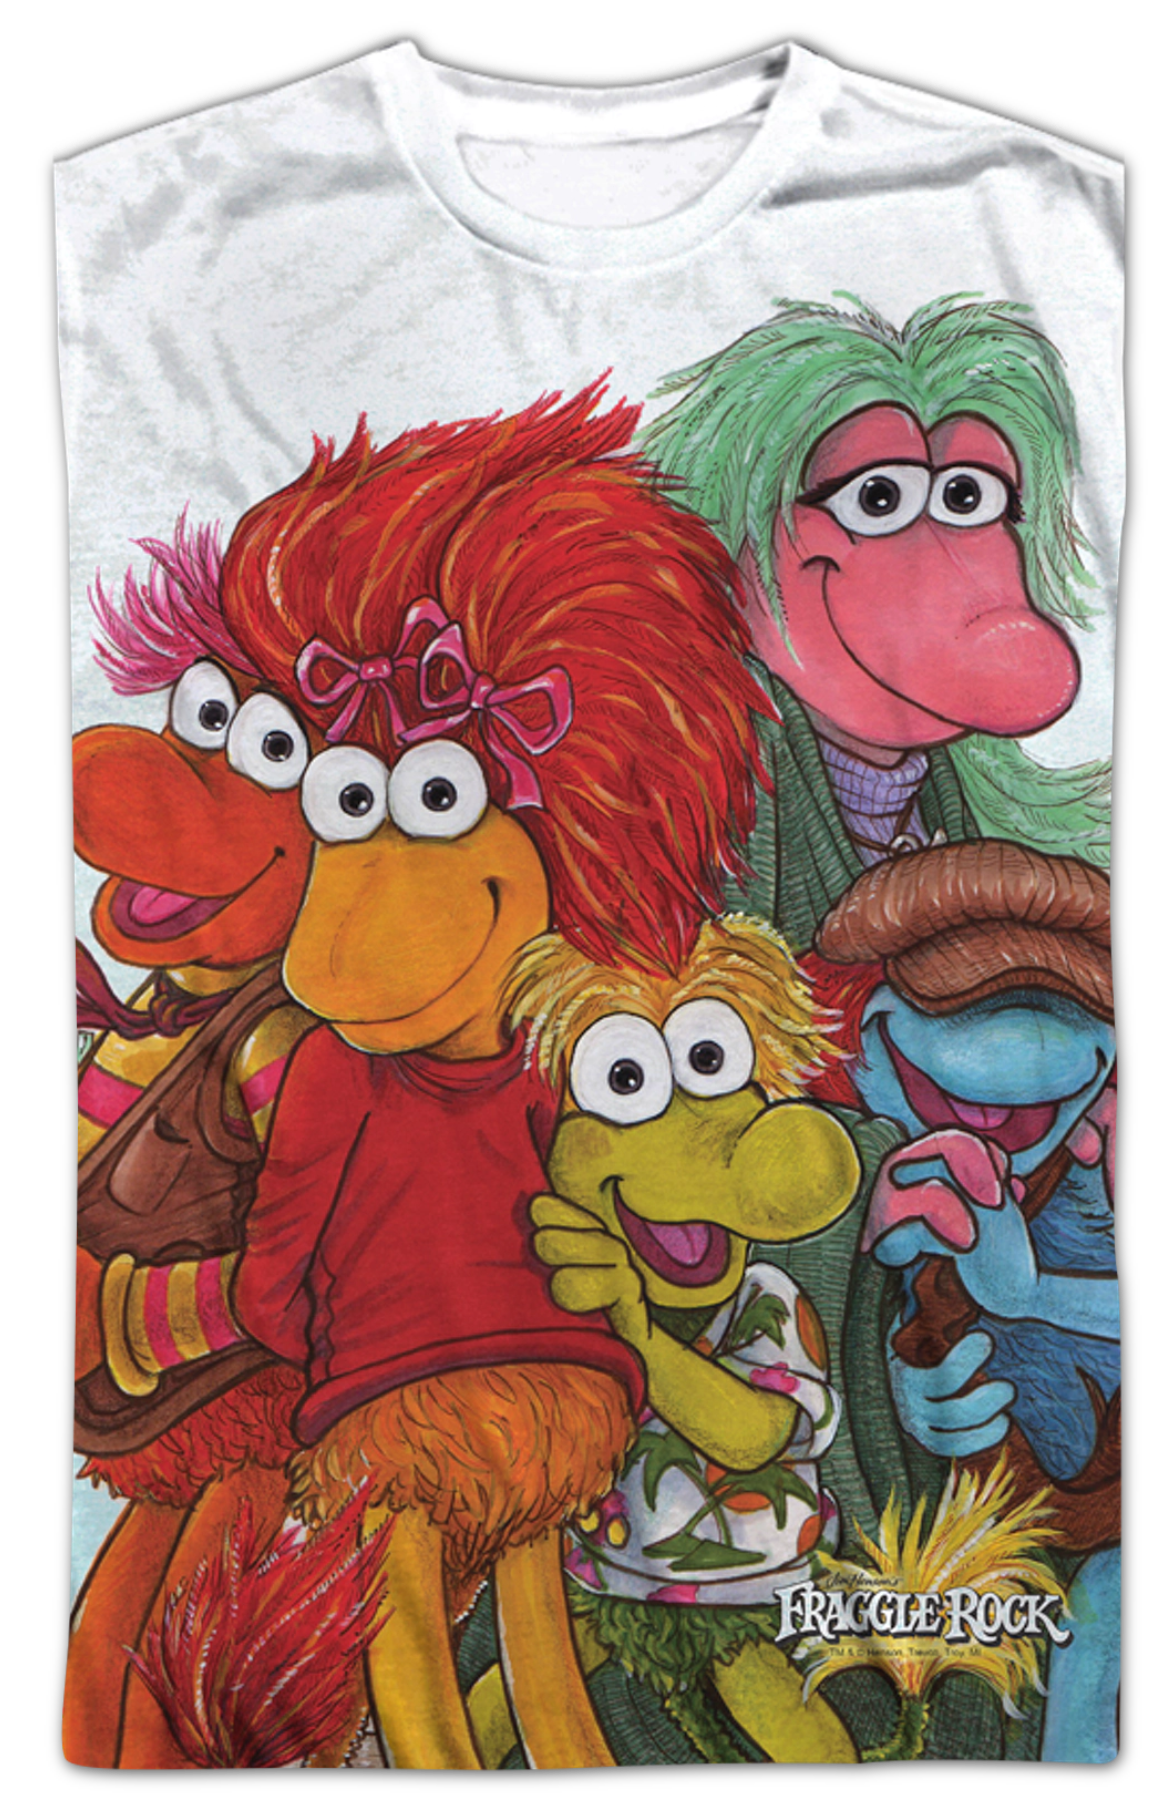 Group Picture Fraggle Rock T-Shirt